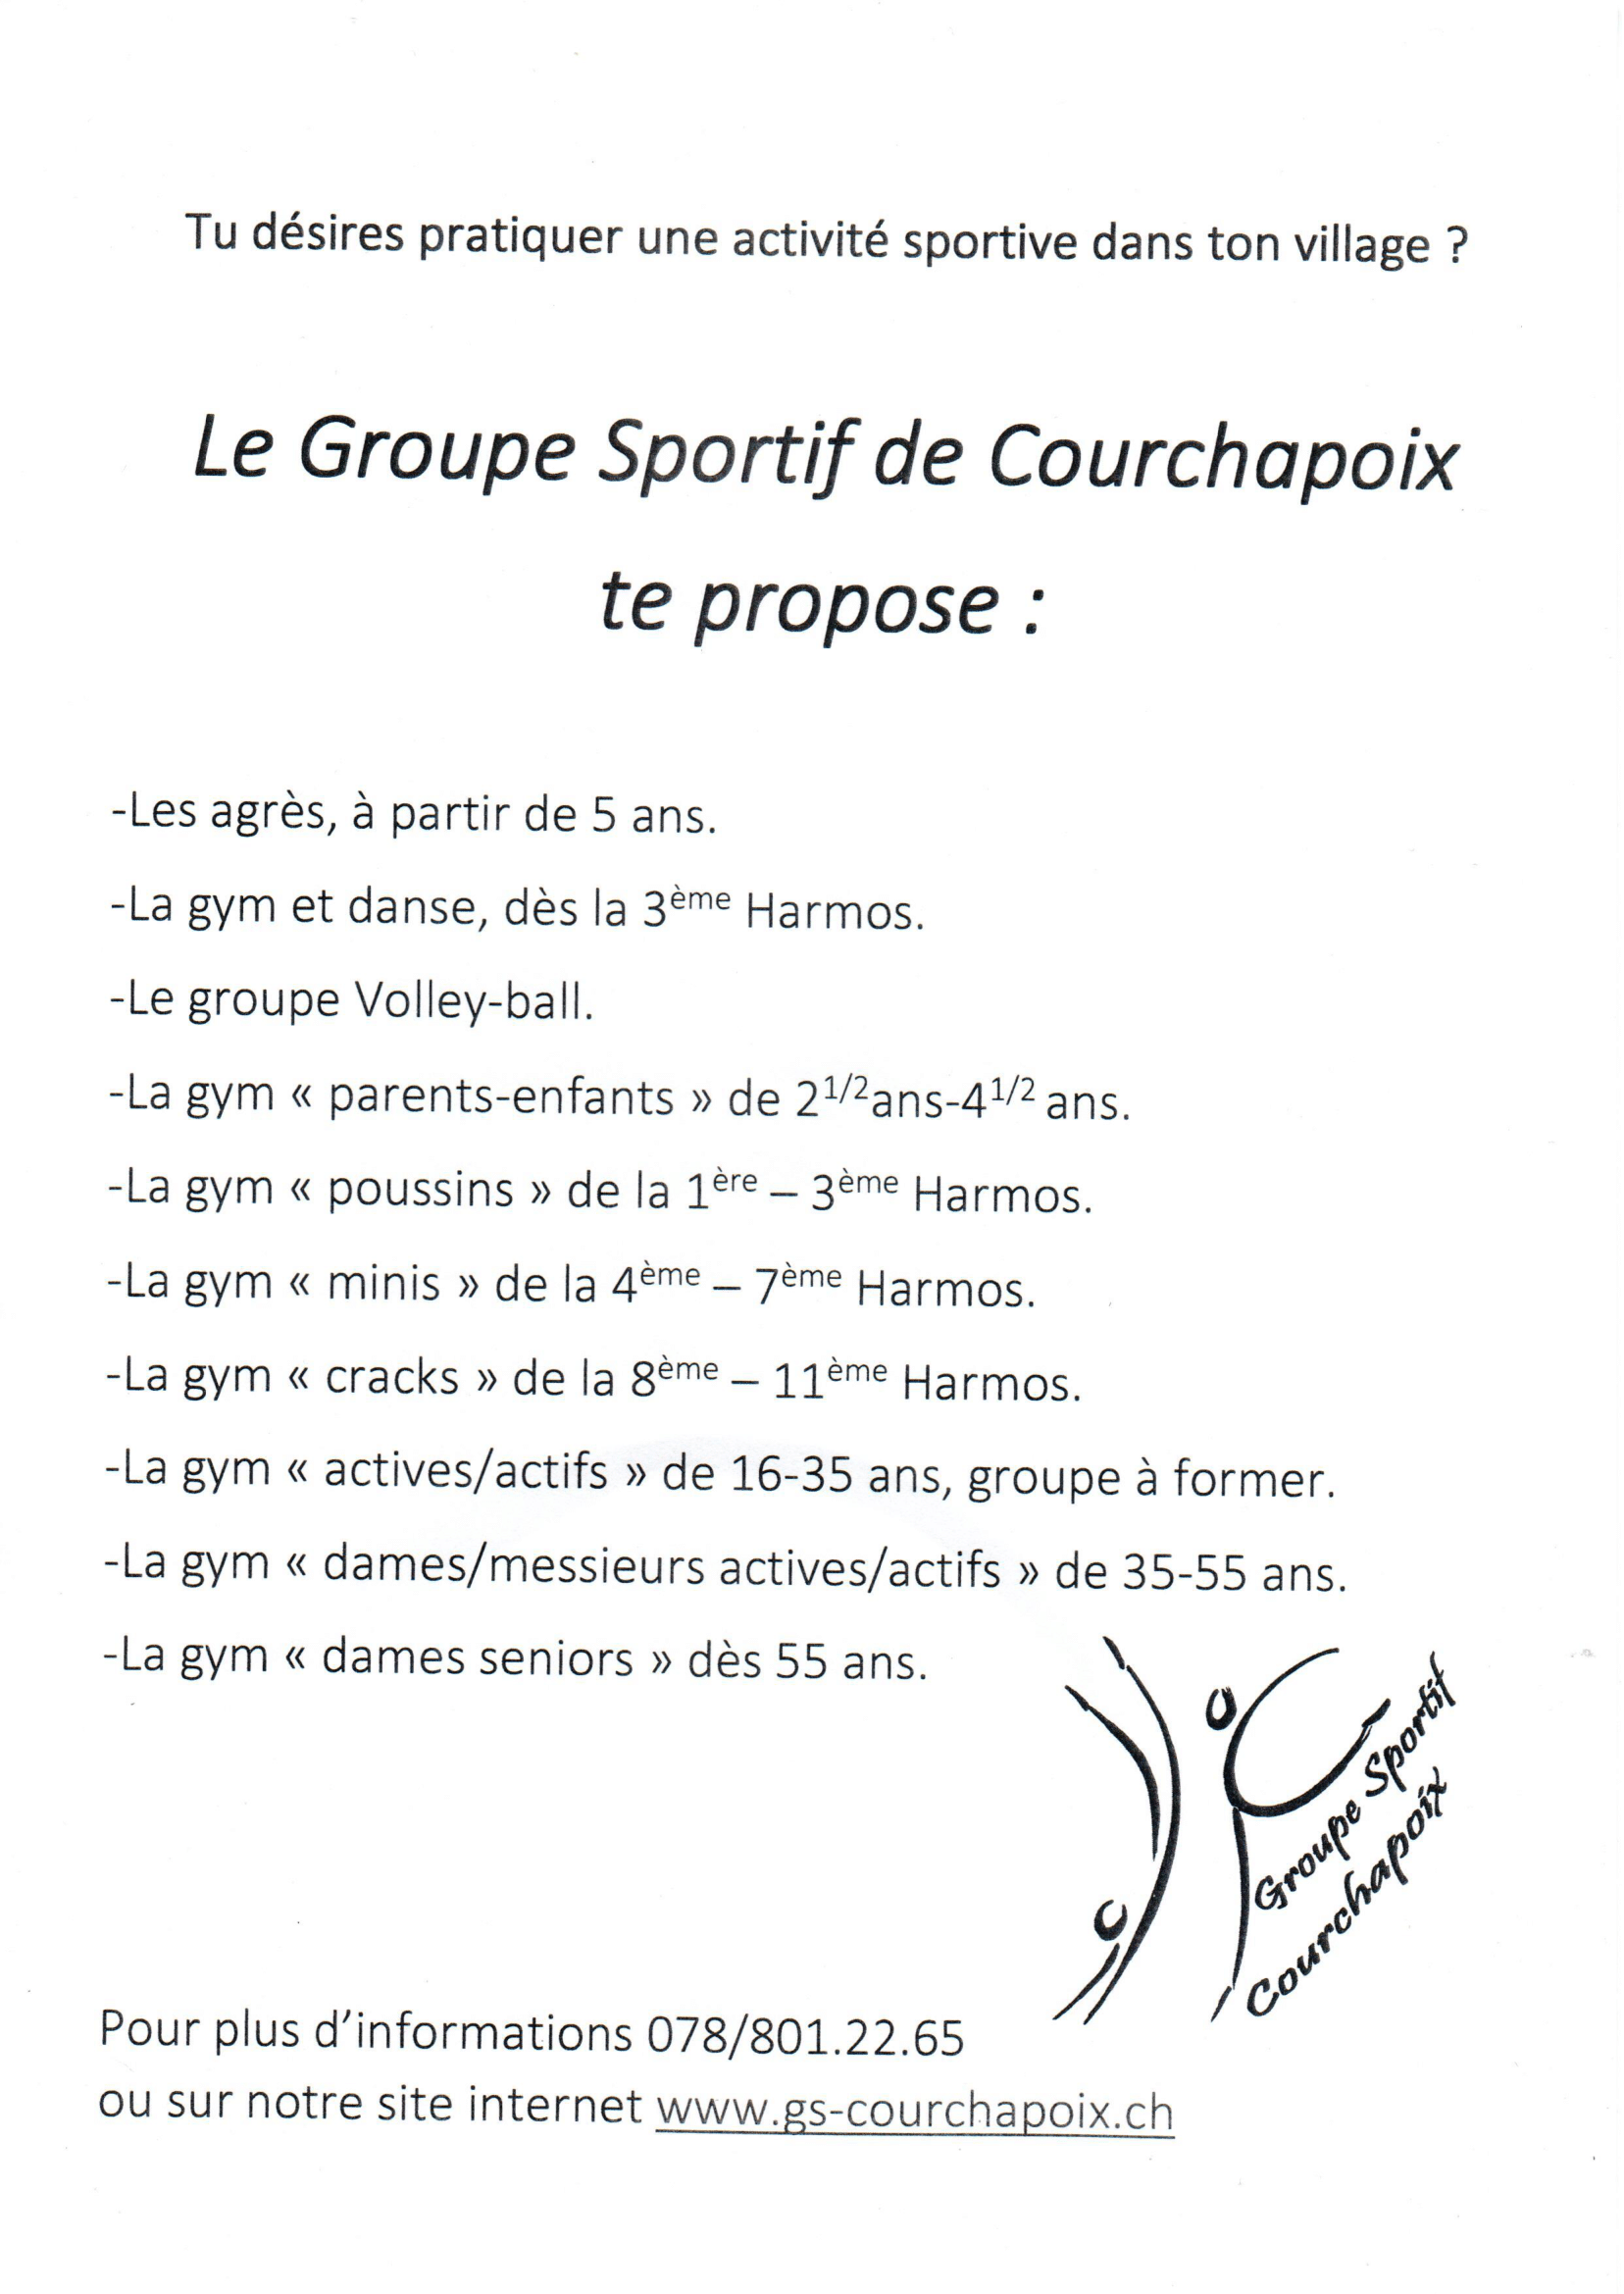 groupe sportif courchapoix 1